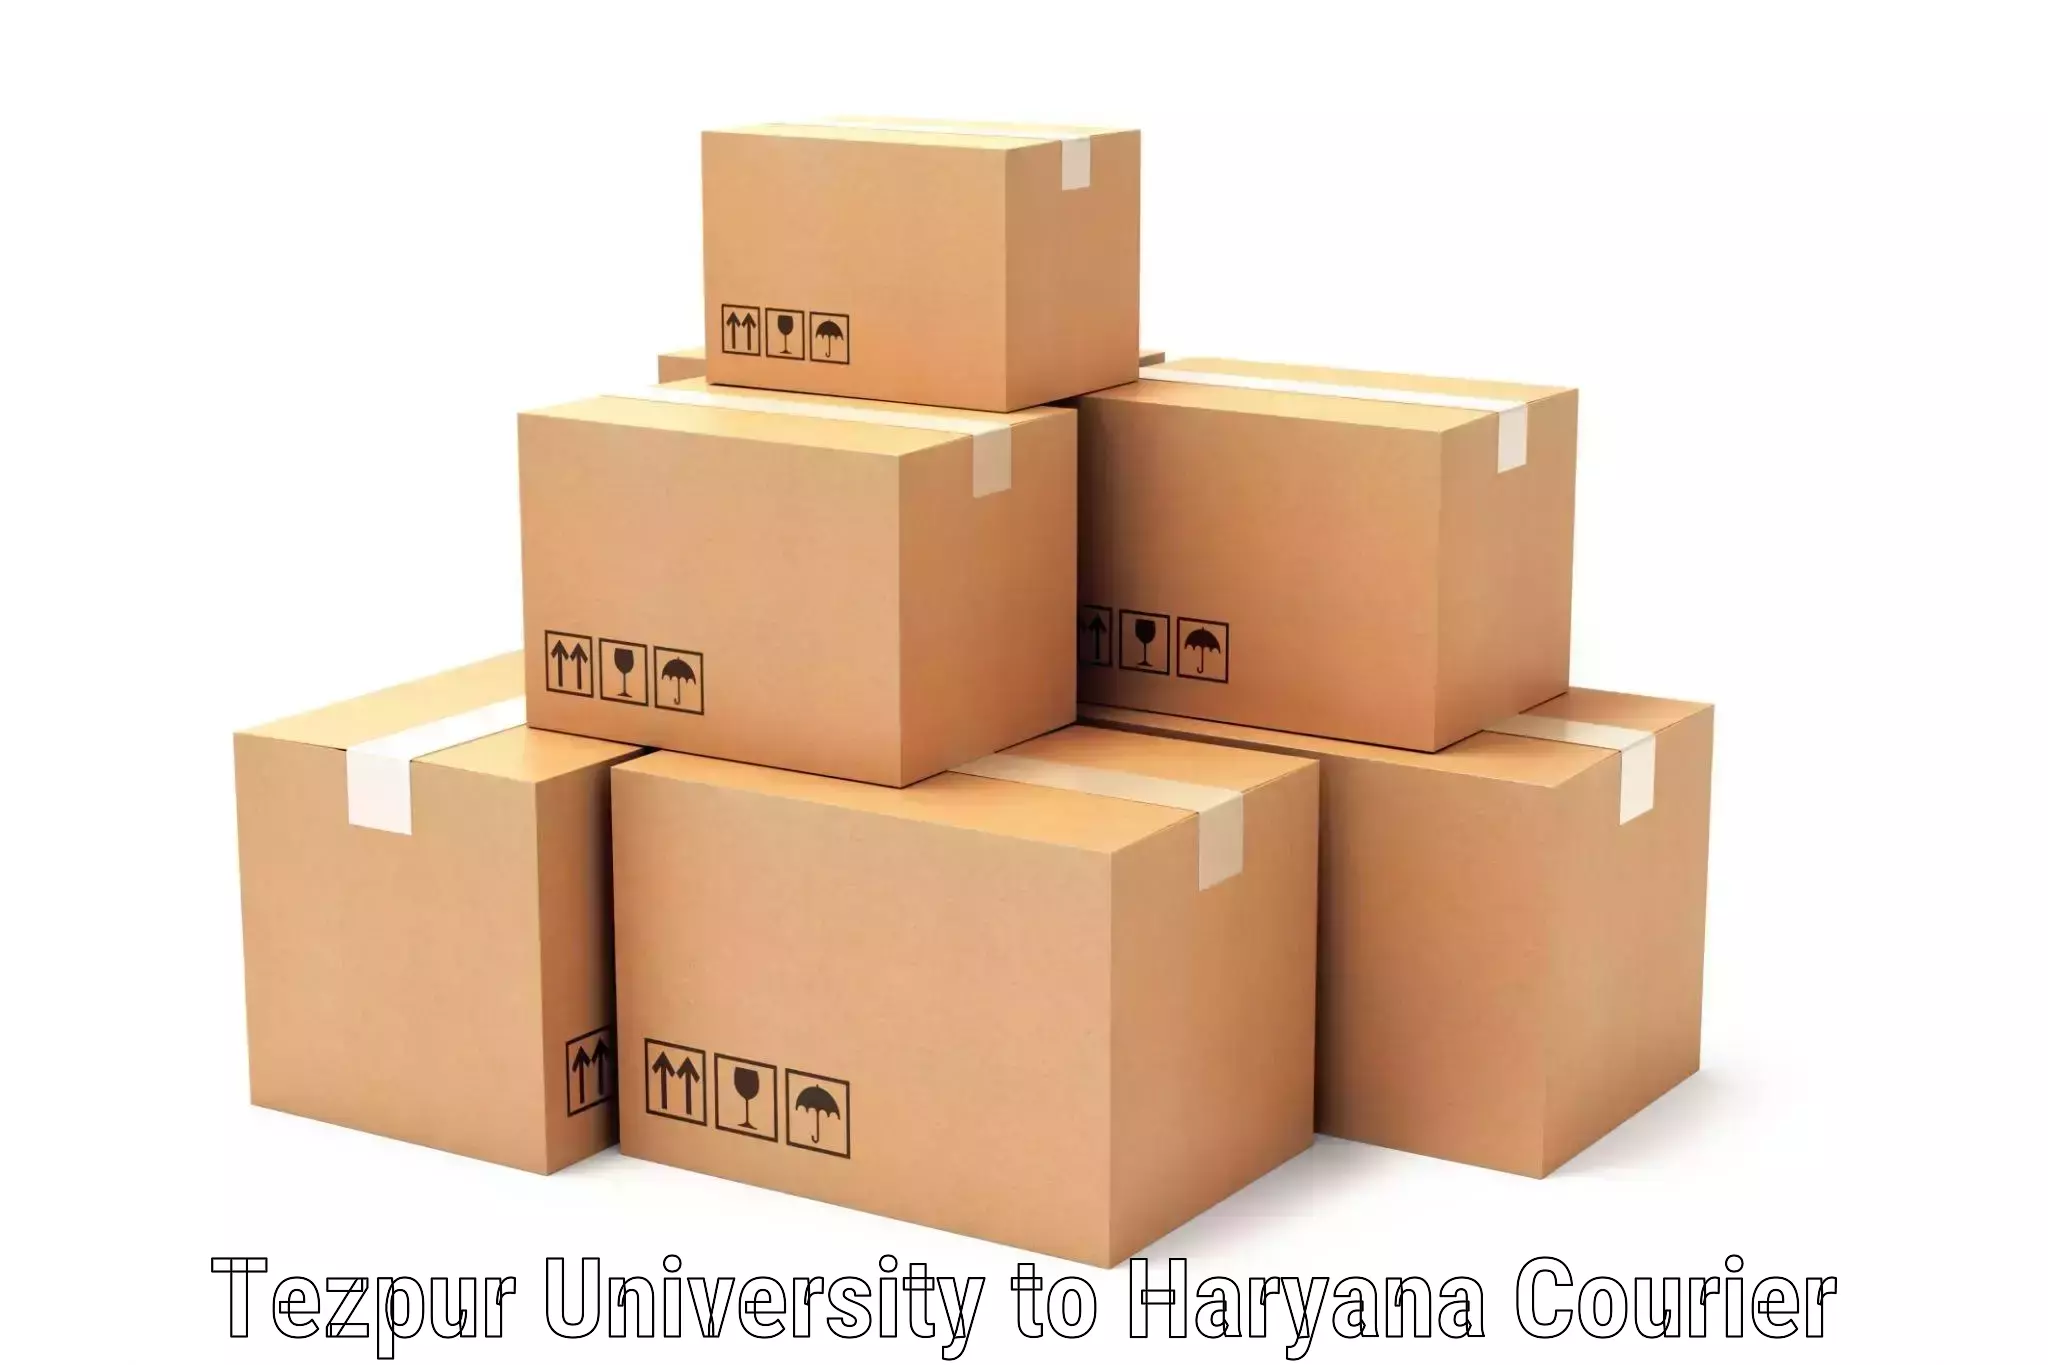 Dynamic courier operations Tezpur University to Chaudhary Charan Singh Haryana Agricultural University Hisar